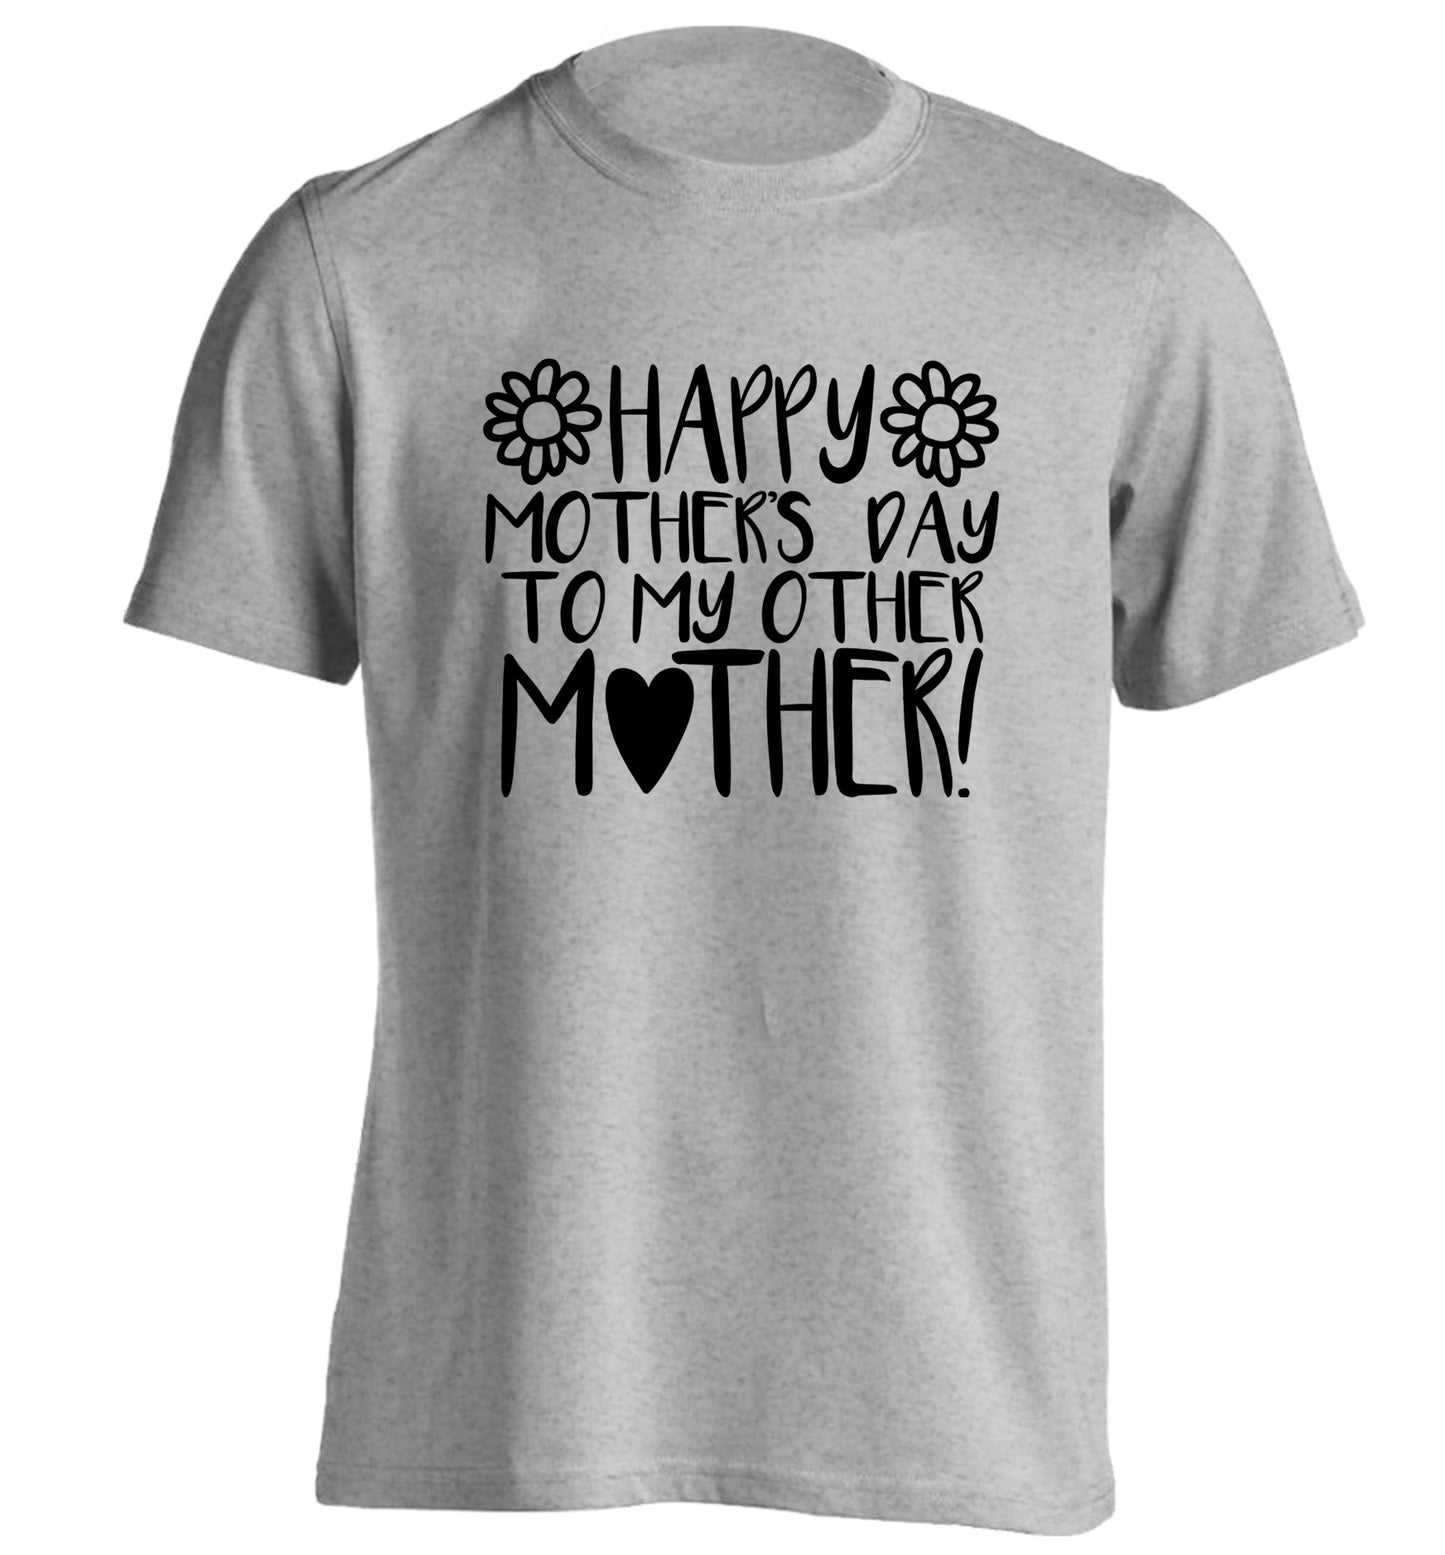 Happy mother's day to my other mother adults unisex grey Tshirt 2XL